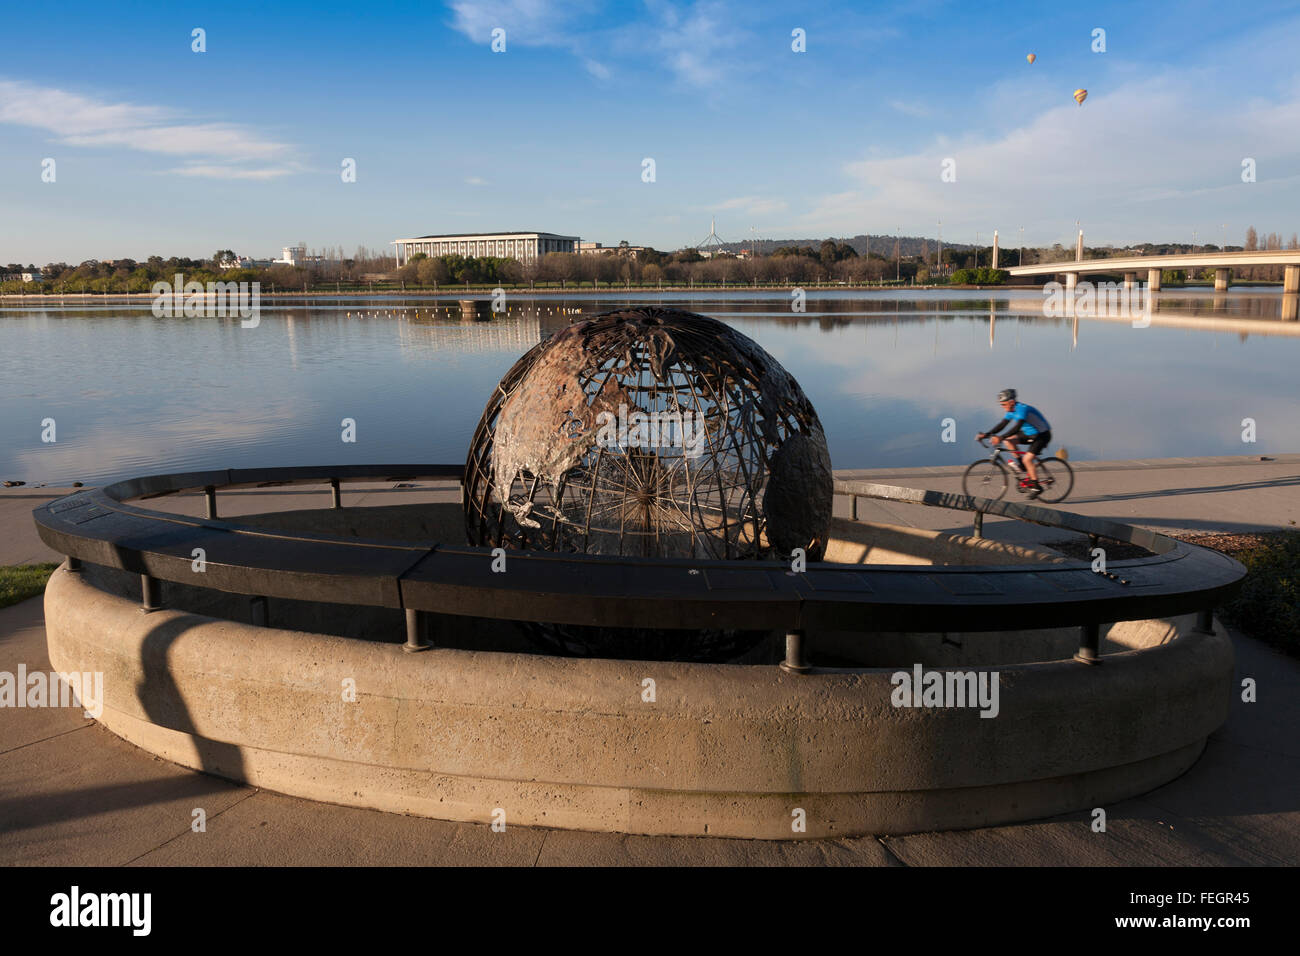 Skeleton globe sculpture at Regatta Point showing the paths of Cook's expeditions Lake Burley Griffin Canberra ACT Australia Stock Photo